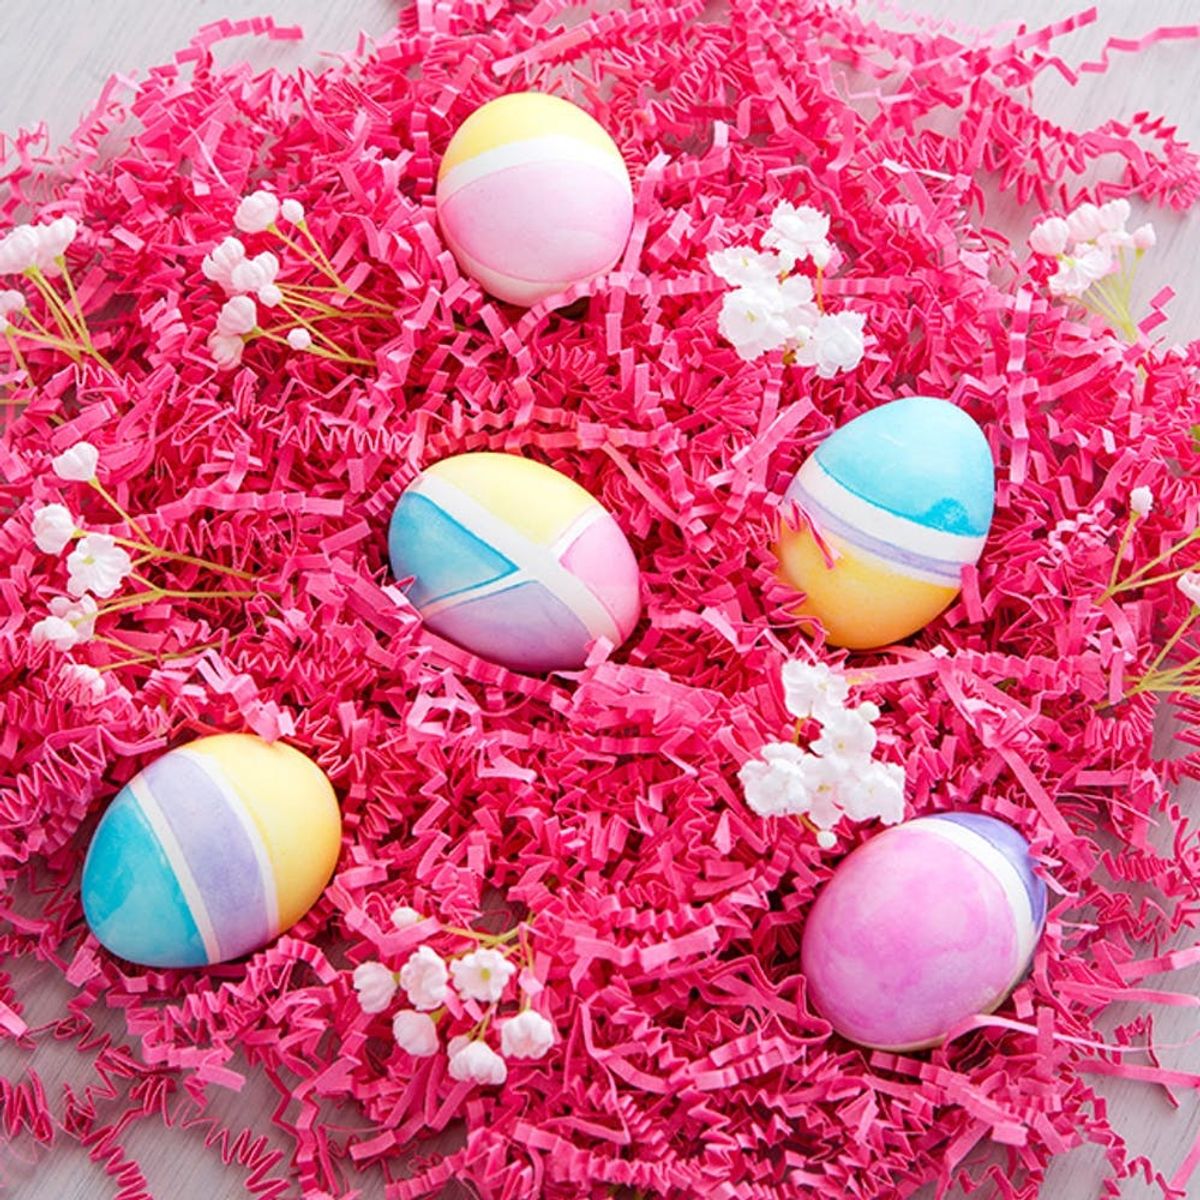 You’re One Office Supply Away from This Easter Egg Hack